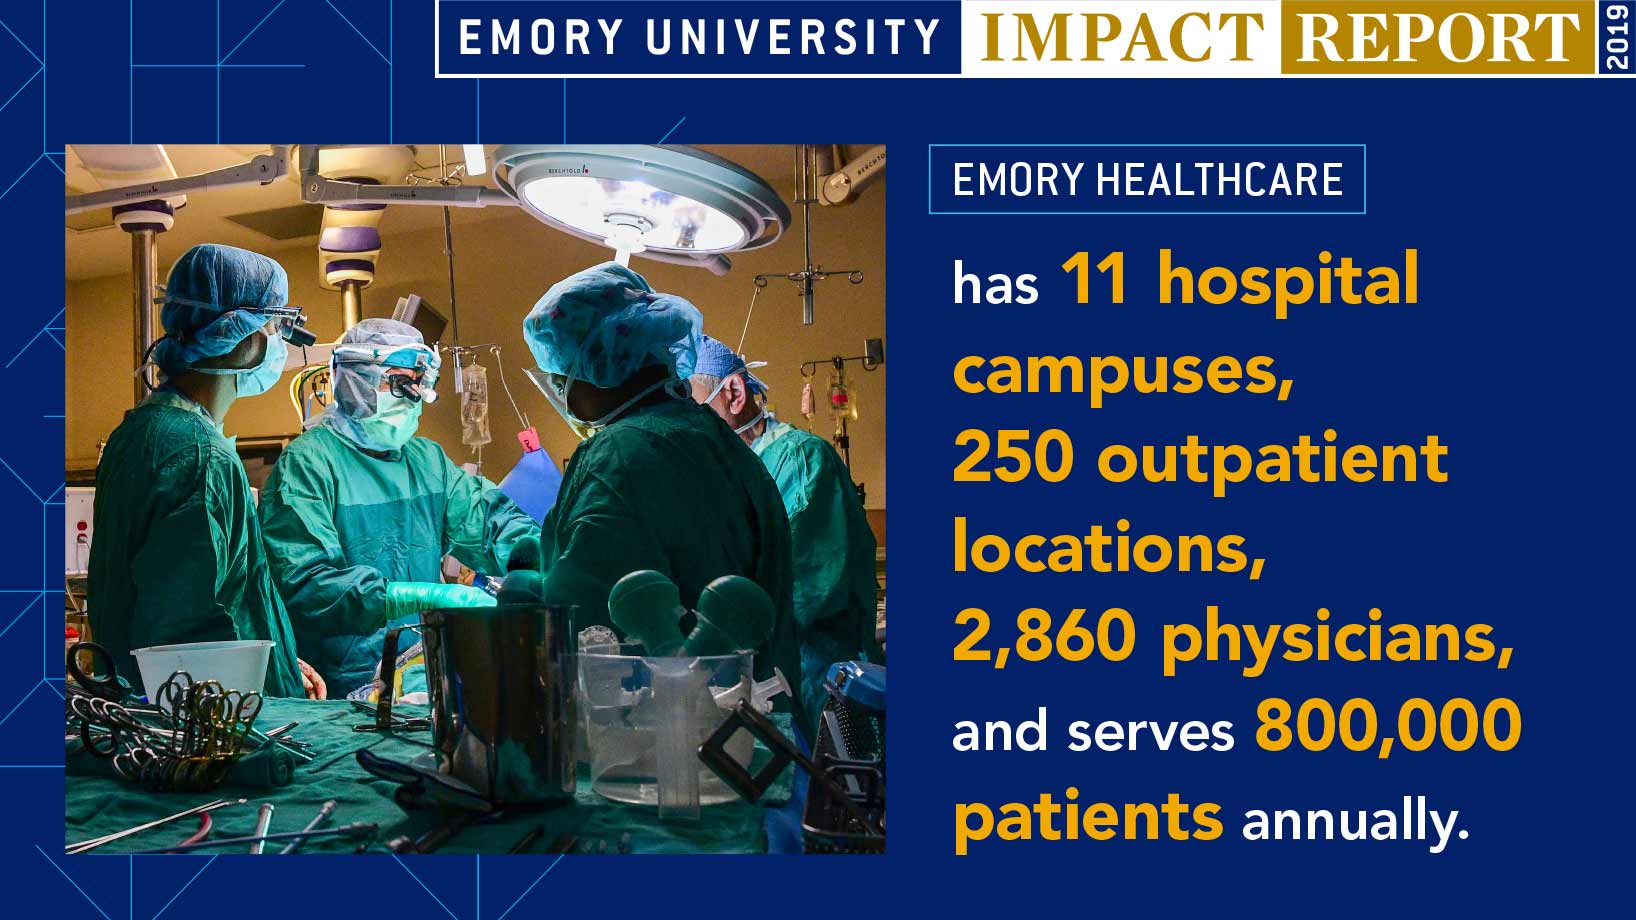 Emory Healthcare has 11 hospital campuses, 250 outpatient locations, 2,860 physicians, and serves 800,000 patients annually.